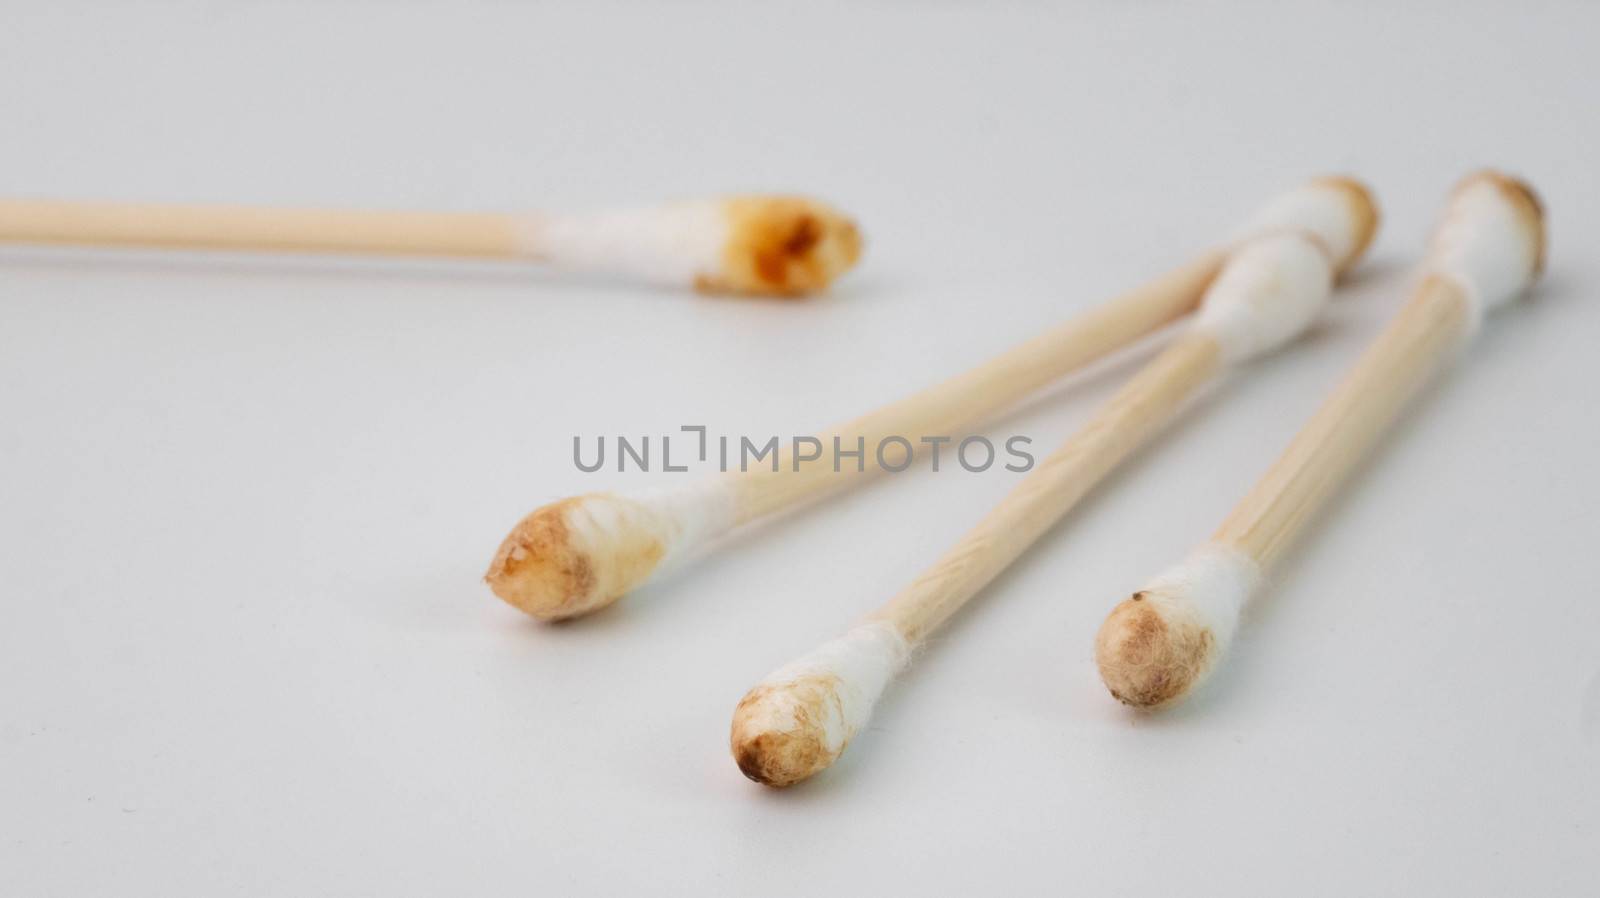 Cotton buds contaminated with earwax on white background. Body cCotton buds contaminated with earwax on white background. Body cleaning and Health care concept. by TEERASAK